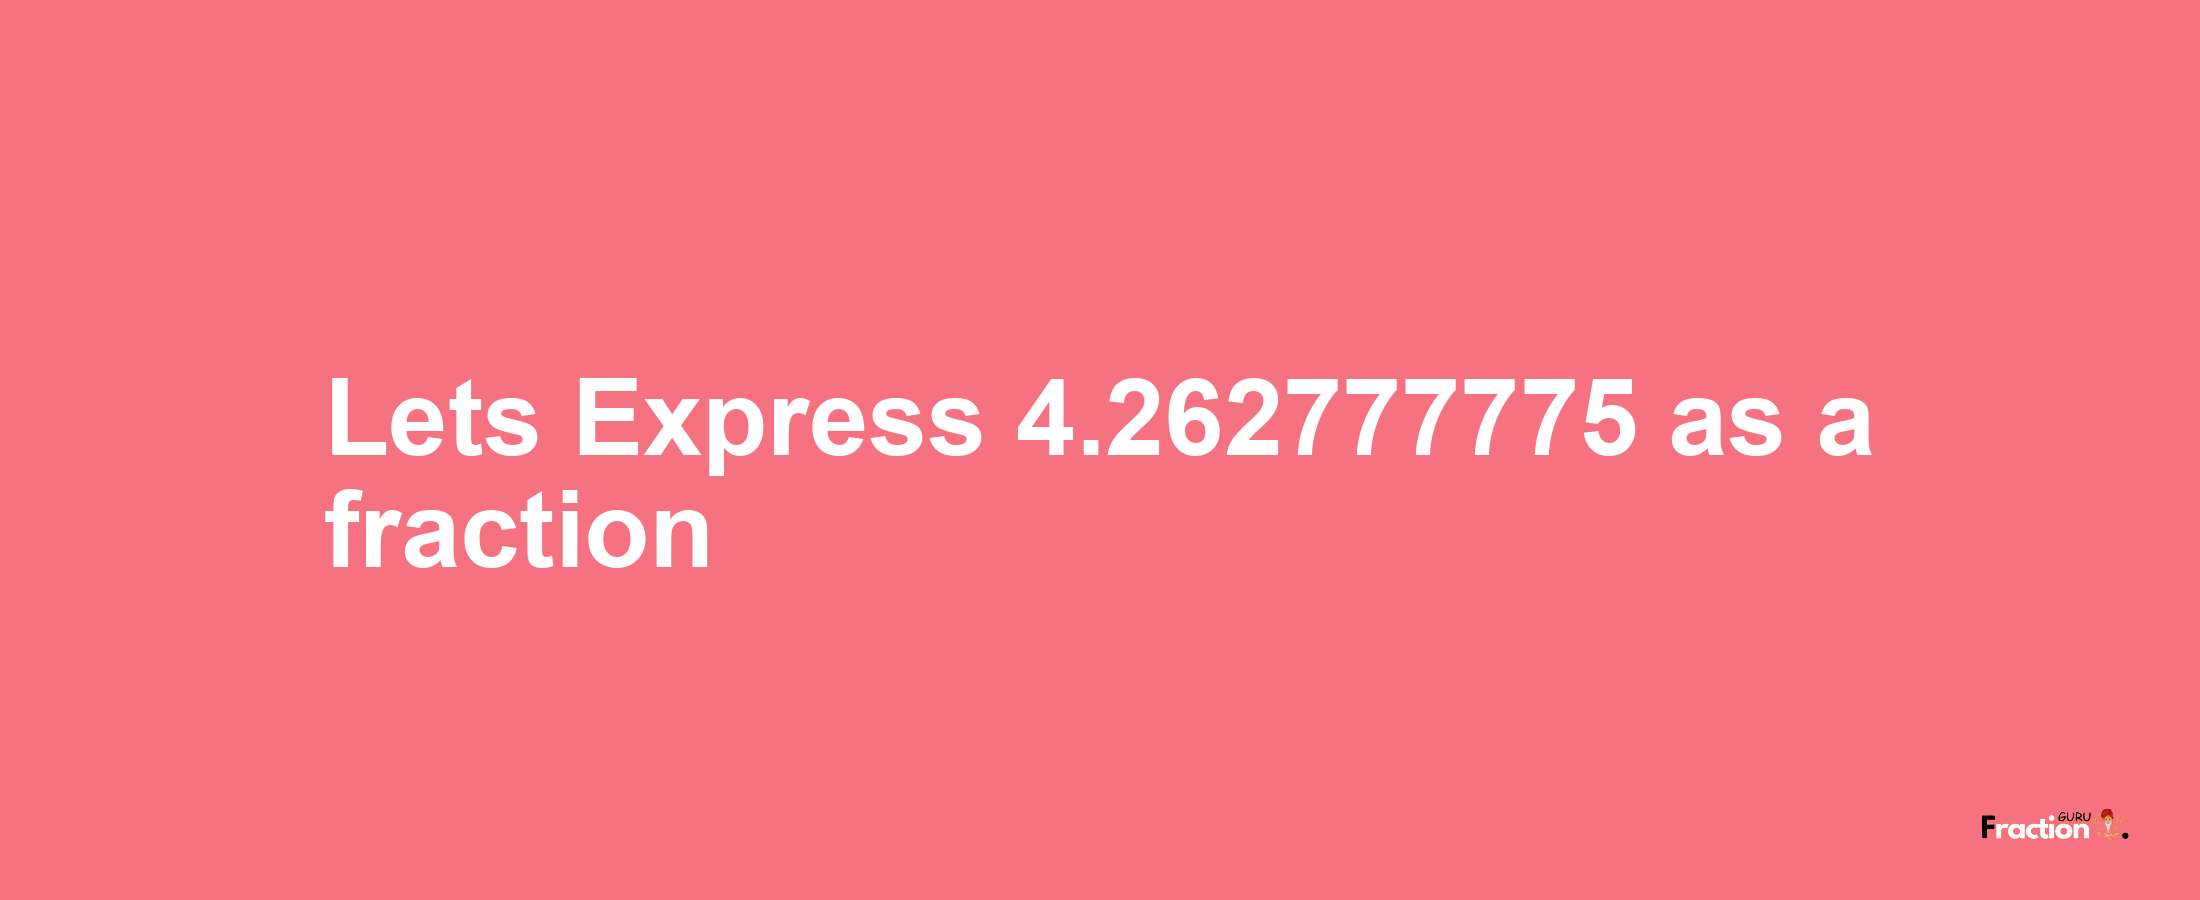 Lets Express 4.262777775 as afraction